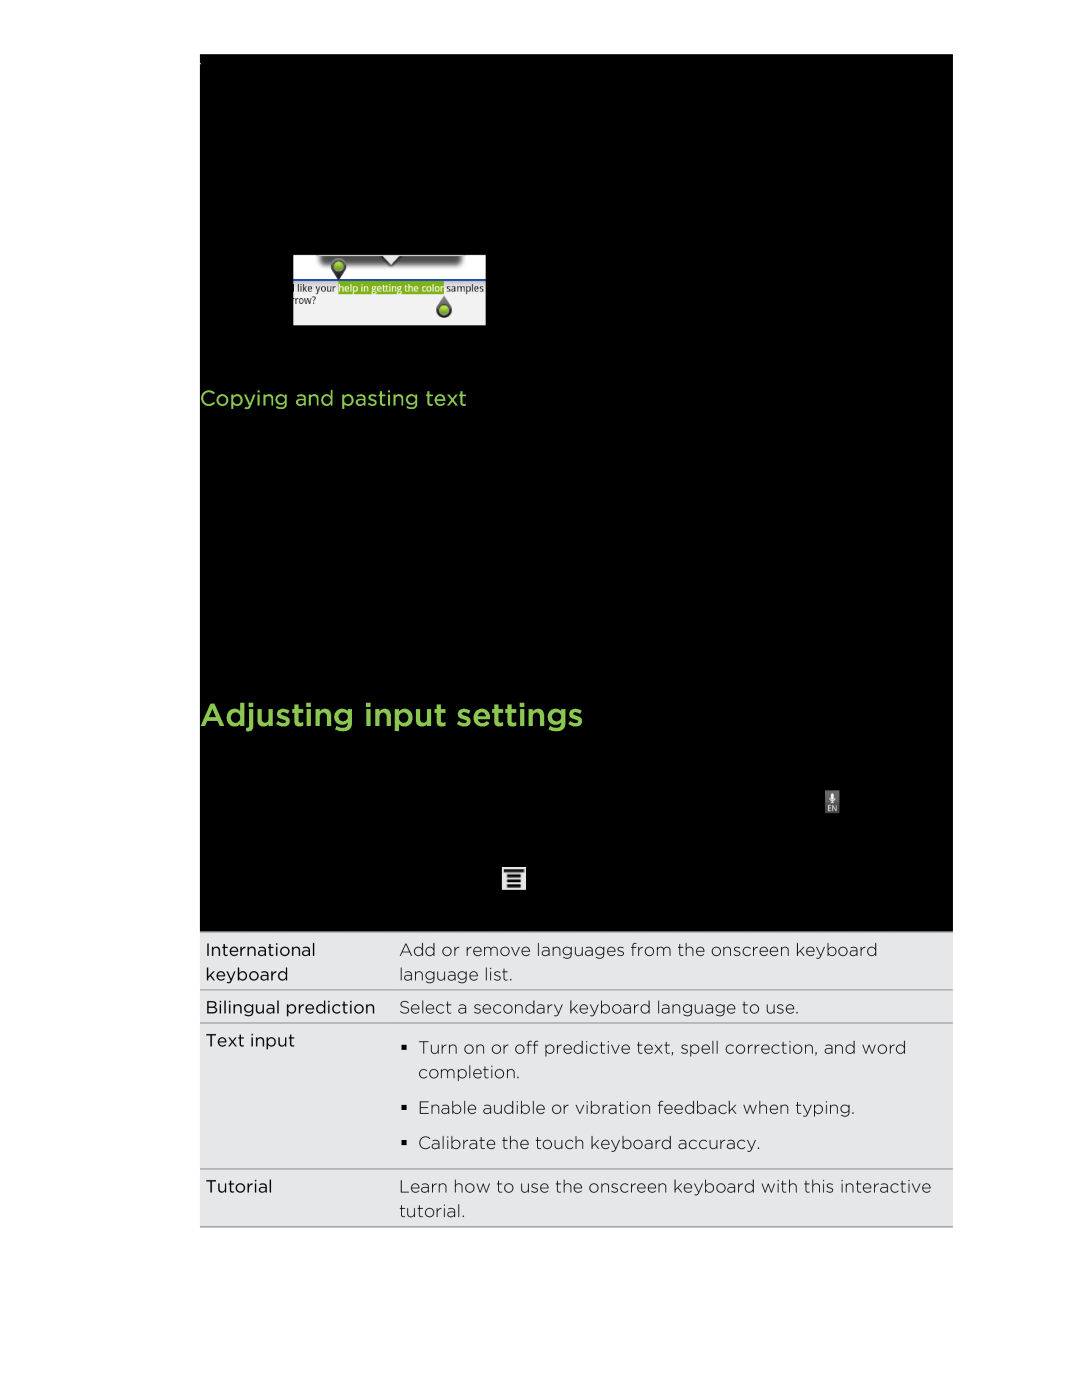 HTC HTCFlyerP512 manual Adjusting input settings, Copying and pasting text, Keyboard 